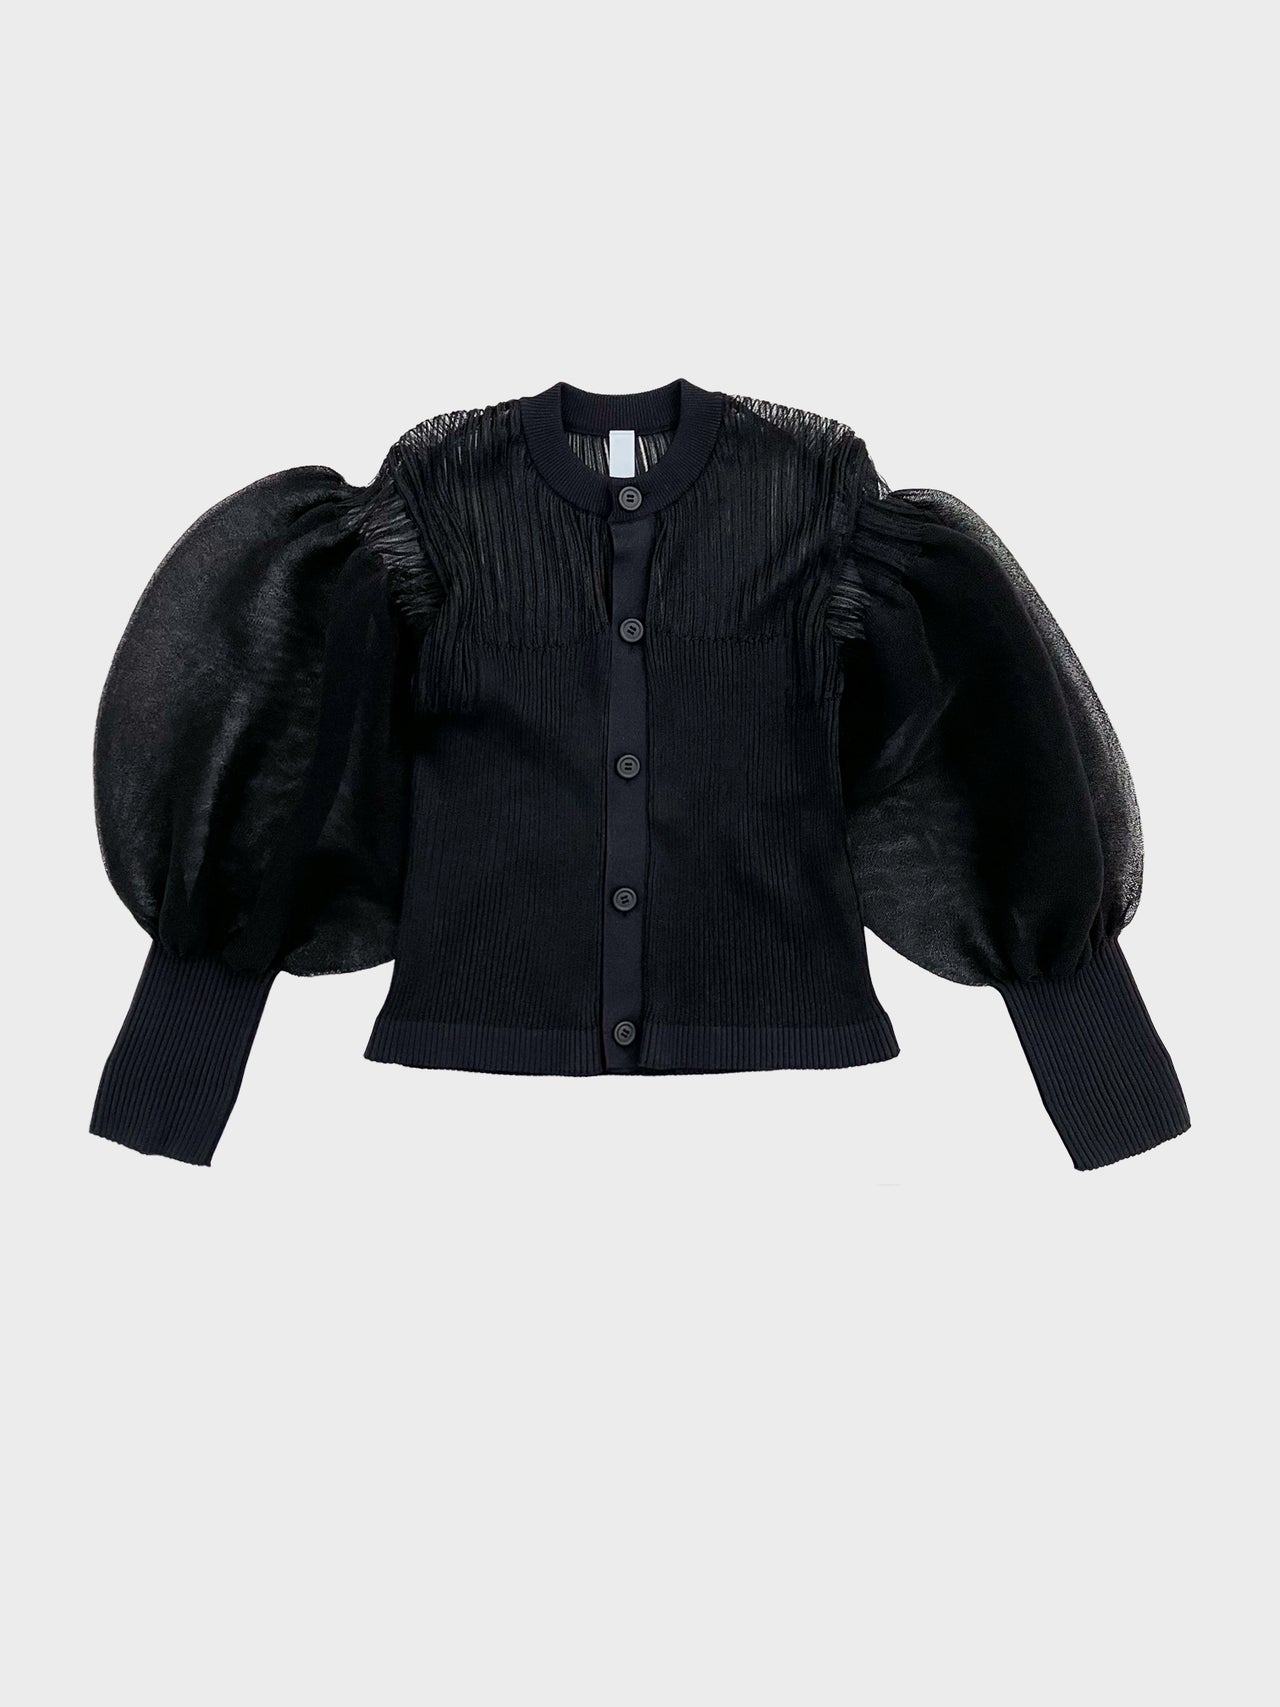 【20%OFF】CFCL / FLUTED LUCENT GLITTER PUFF SLEEVE CROPPED CARDIGAN (BLACK)